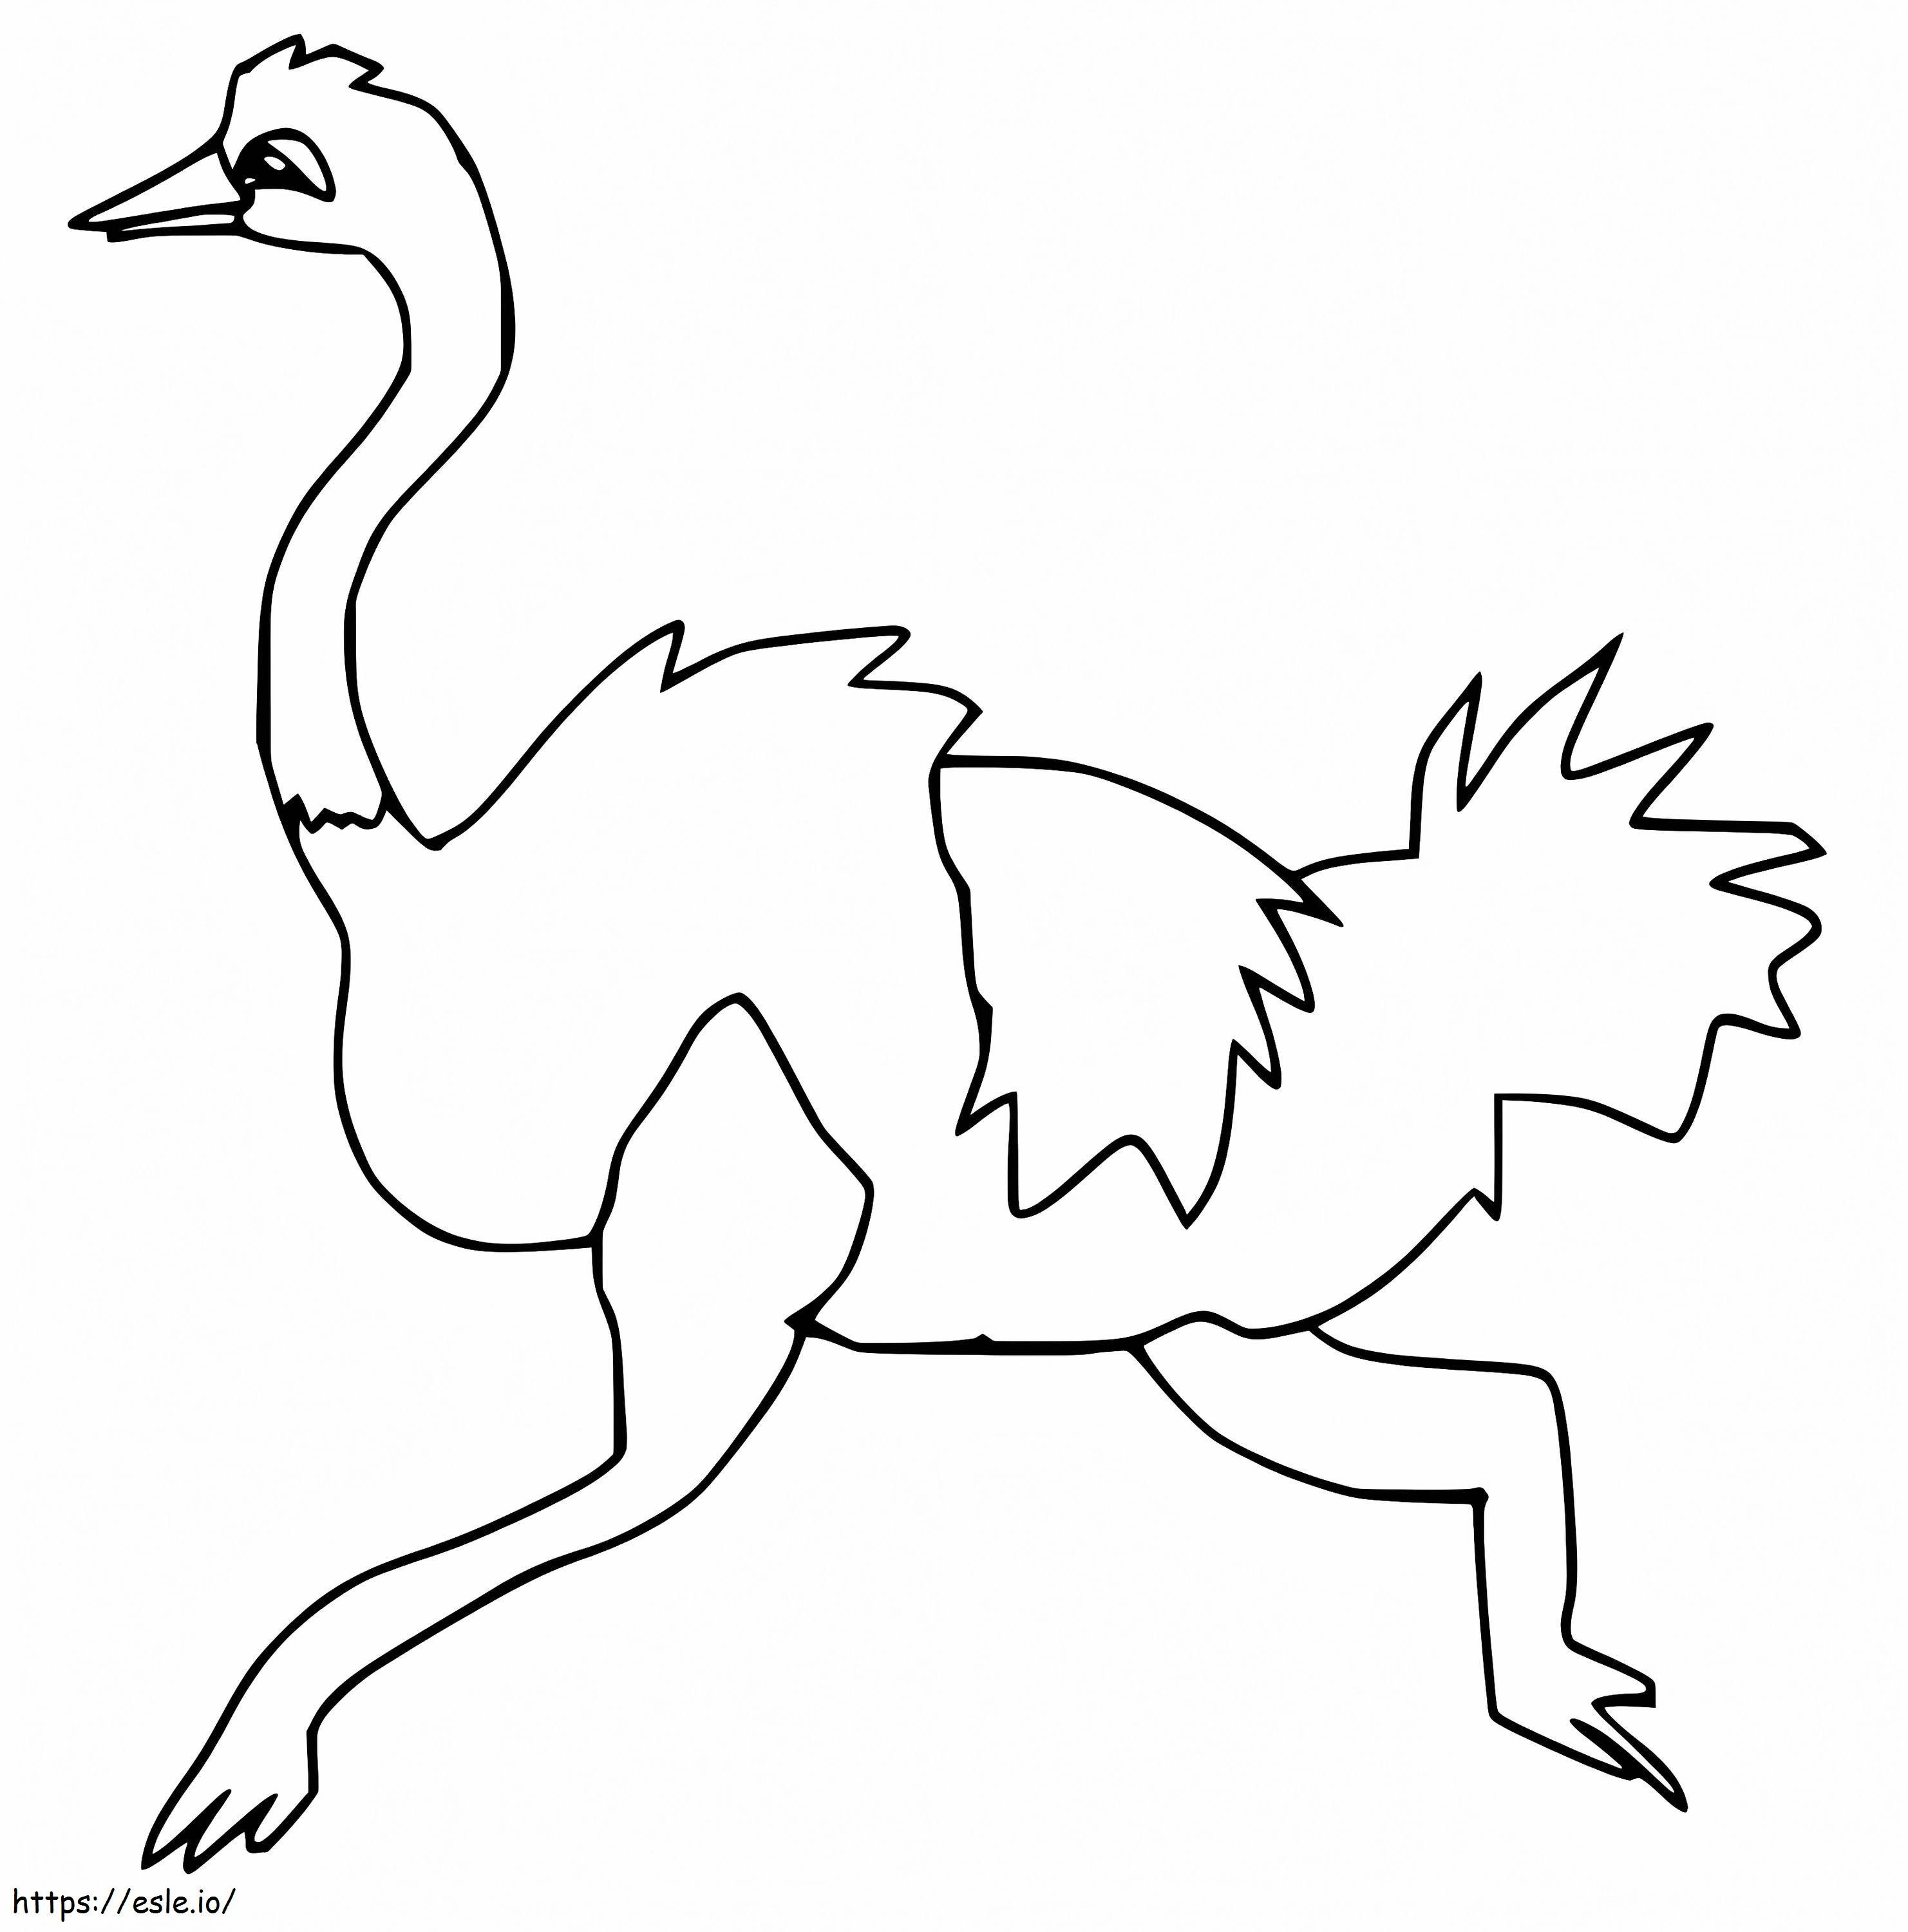 Emu Is Running coloring page